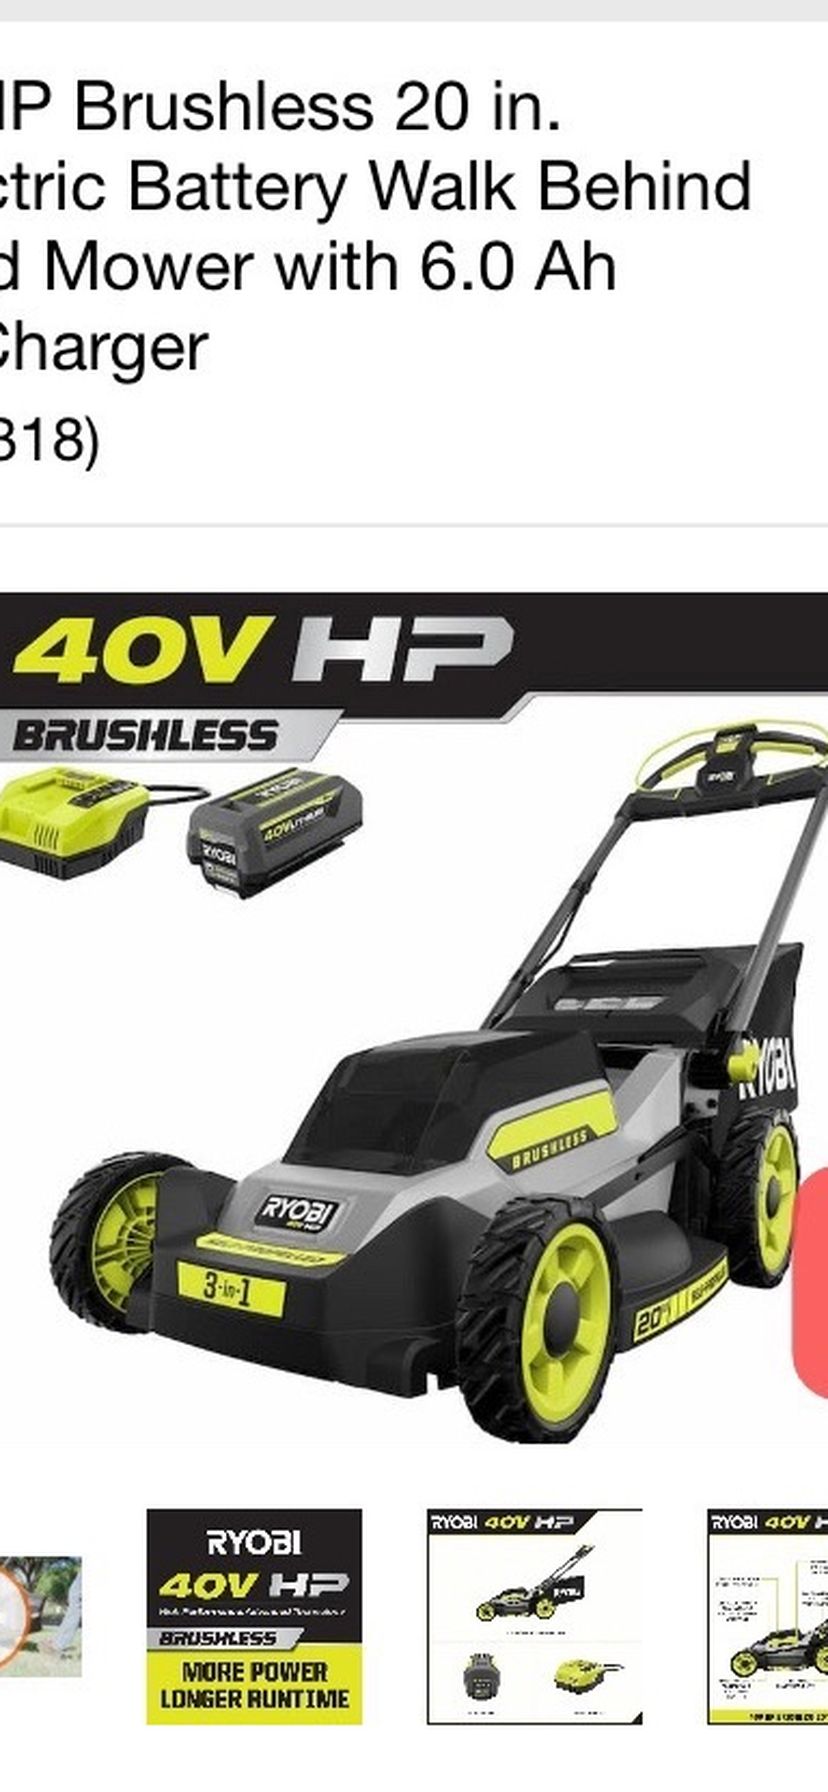 RYOBI 40V HP Brushless 20 in. Cordless Electric Battery Walk Behind Self-Propelled Mower with 6.0 Ah Battery and Charger